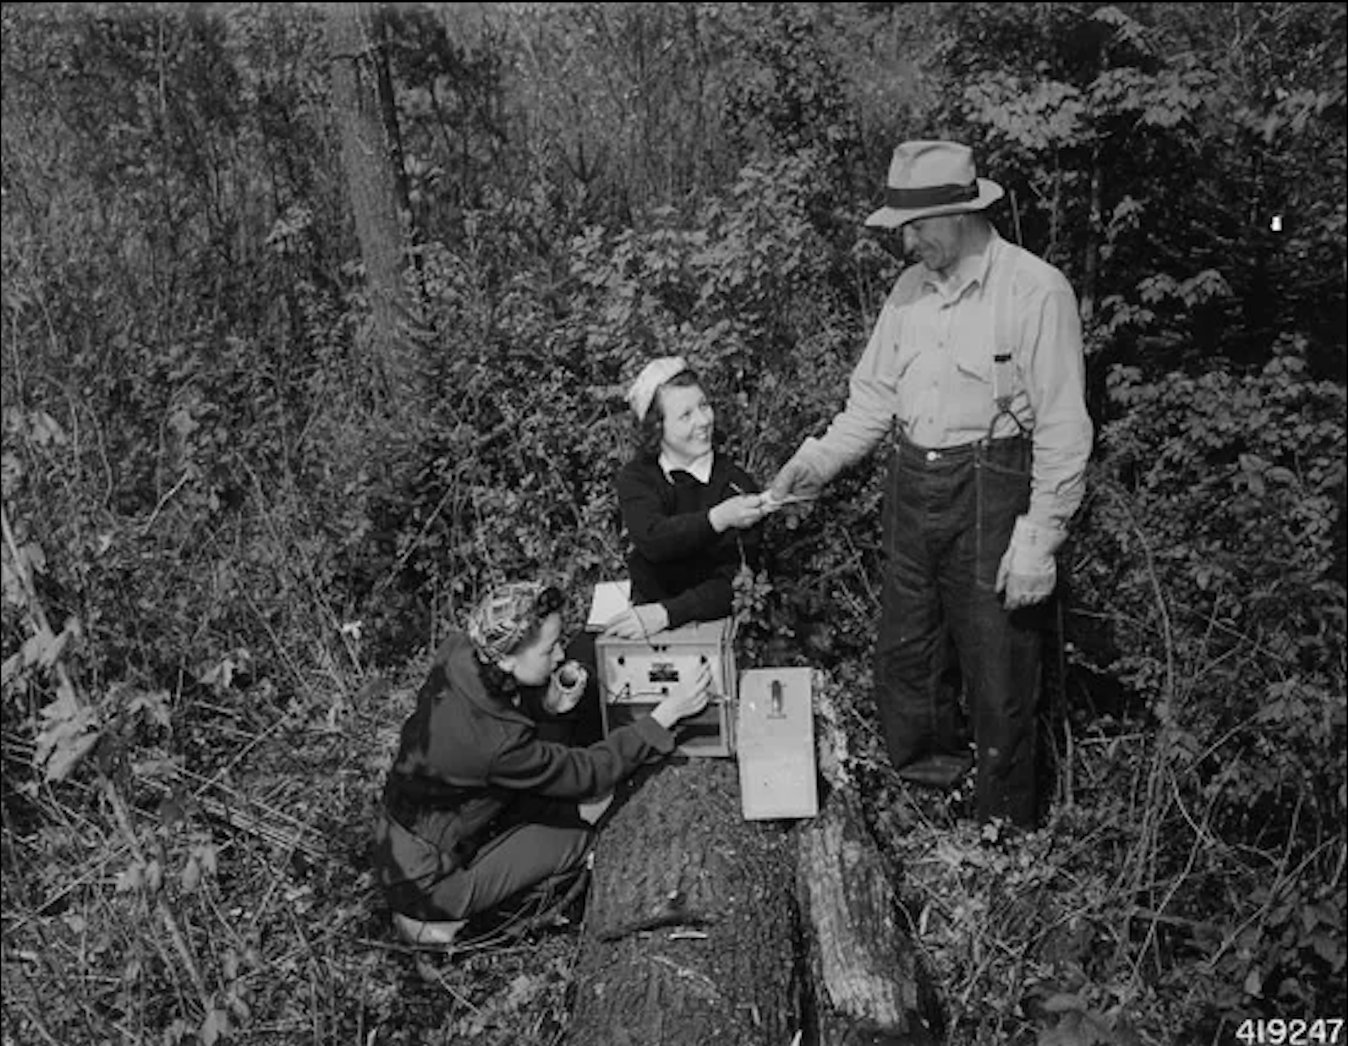 Photograph of 2 women taking scientific measurements in a forest with a man assisting.